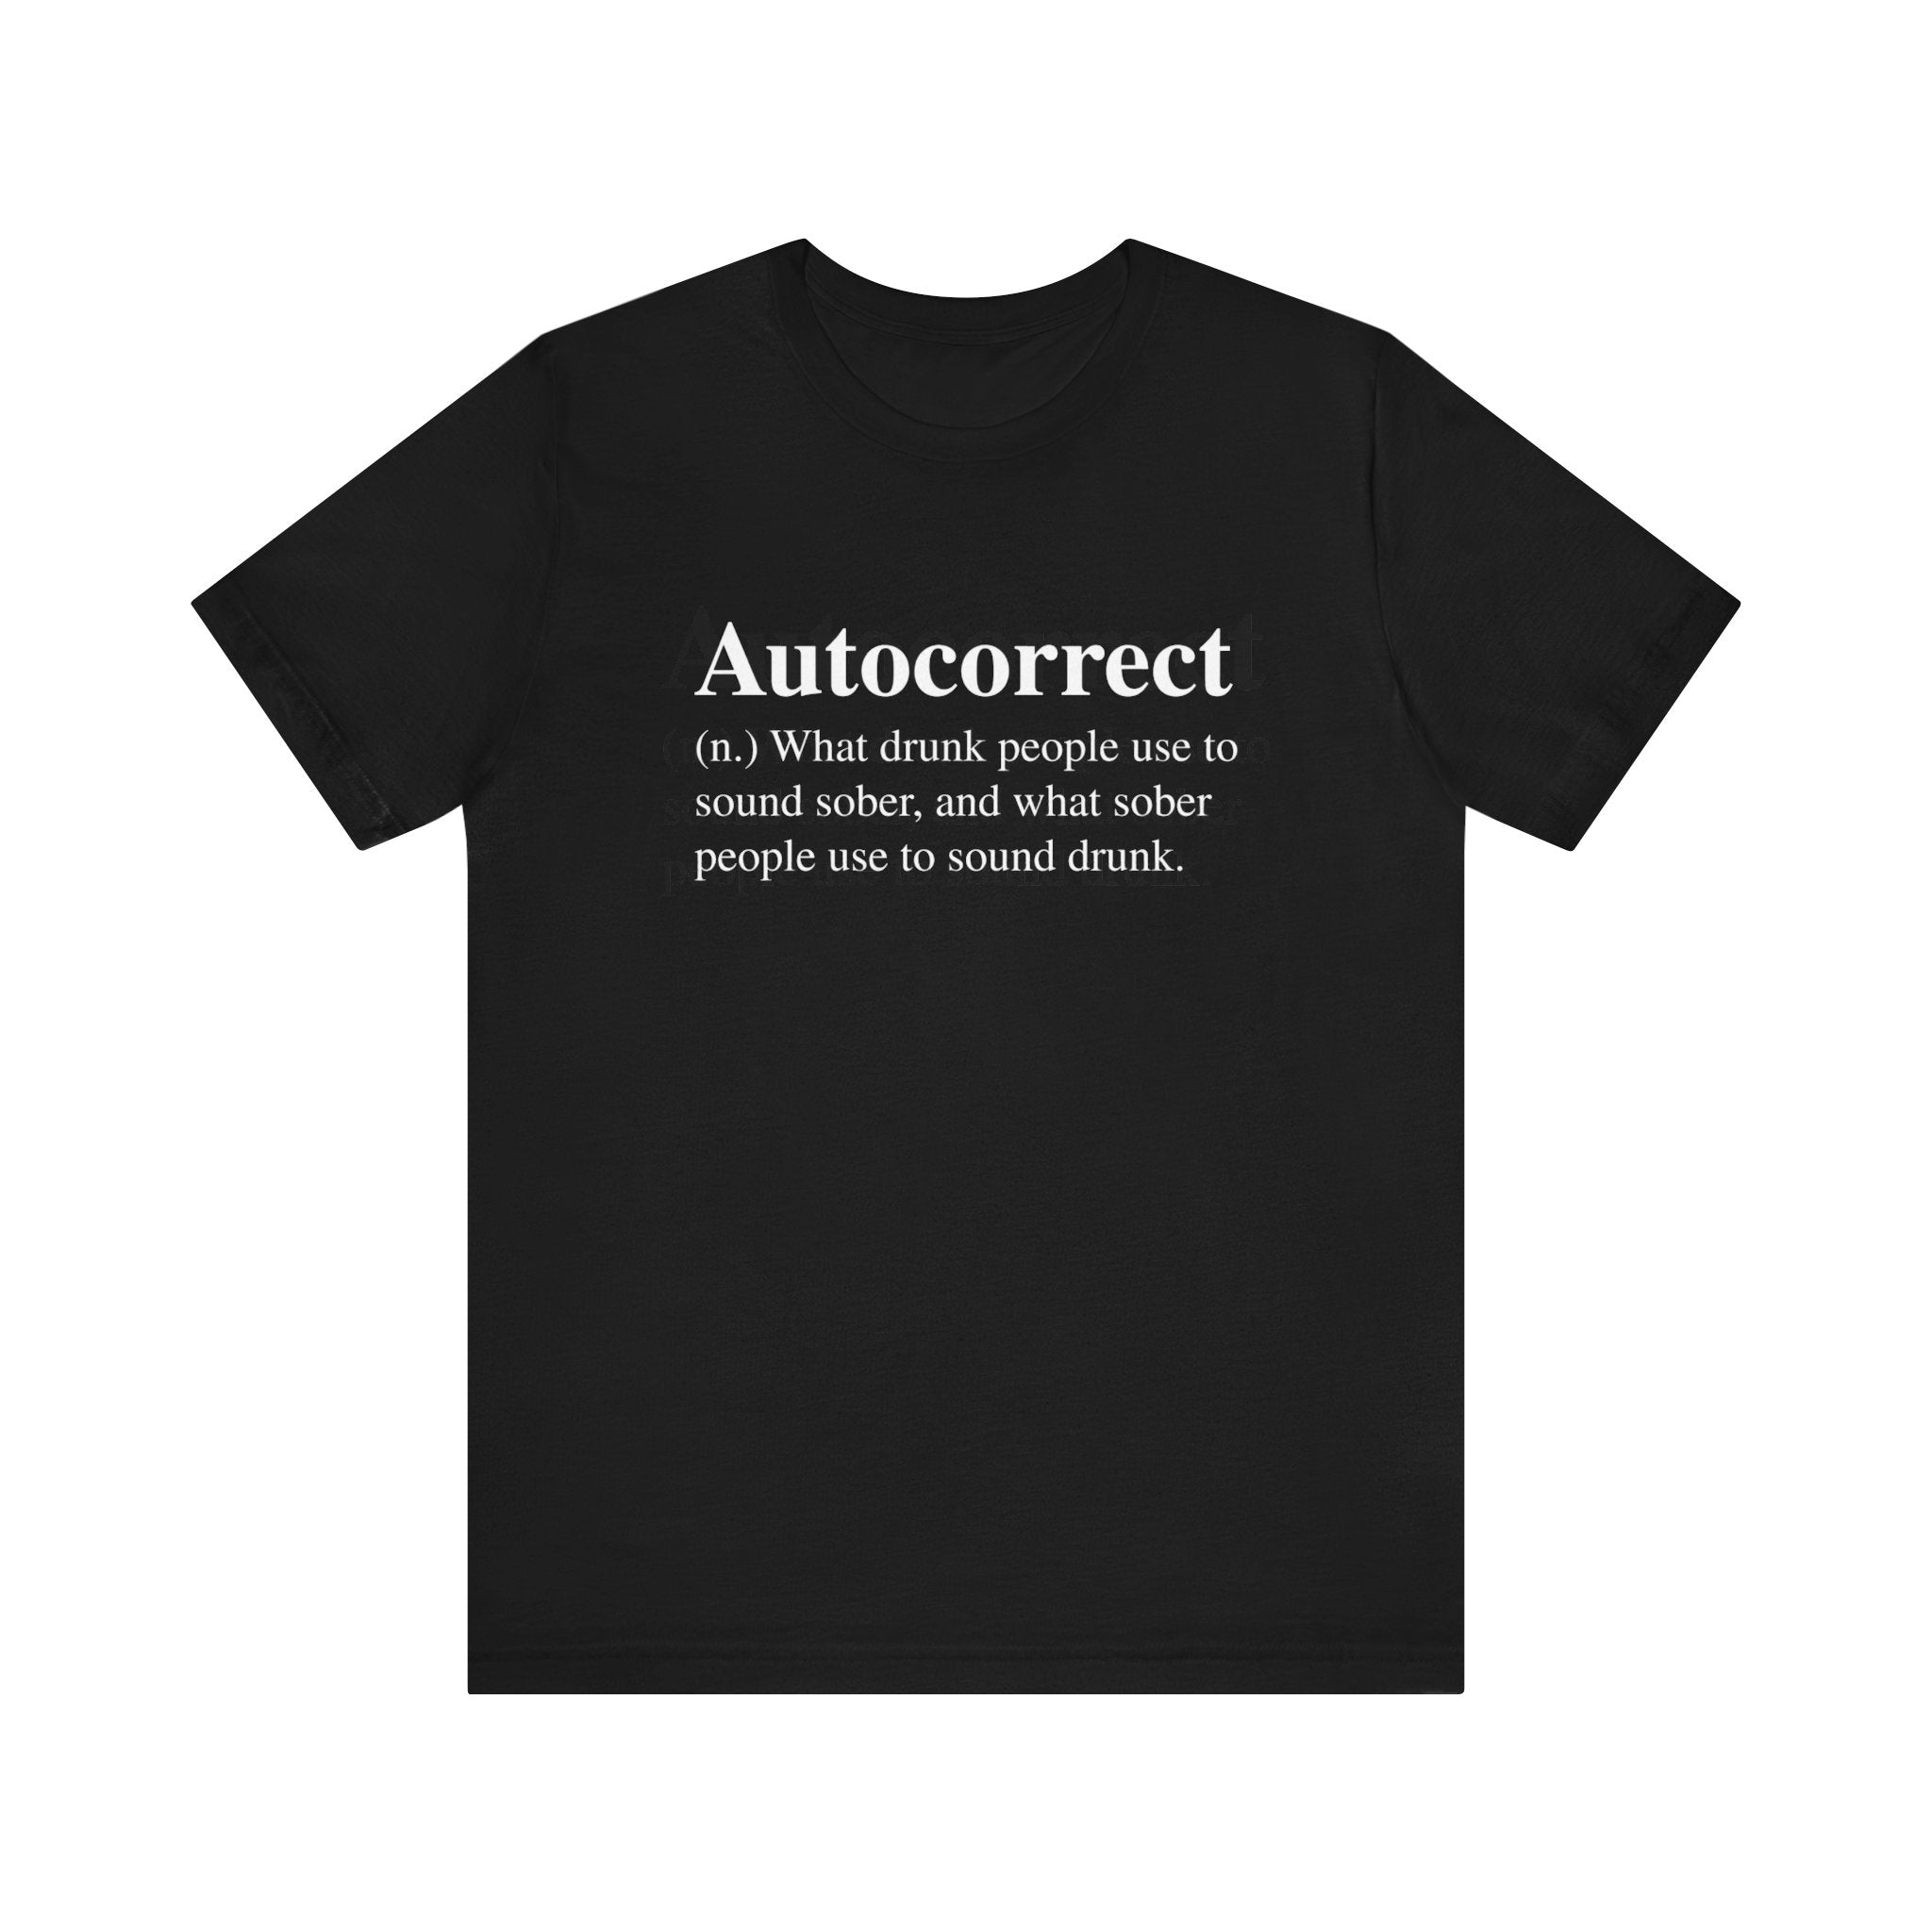 Autocorrect T-shirt crafted from soft cotton, featuring quality print with white text humorously defining "auto-correct" as a tool used by the drunk to sound sober and the sober to sound drunk.